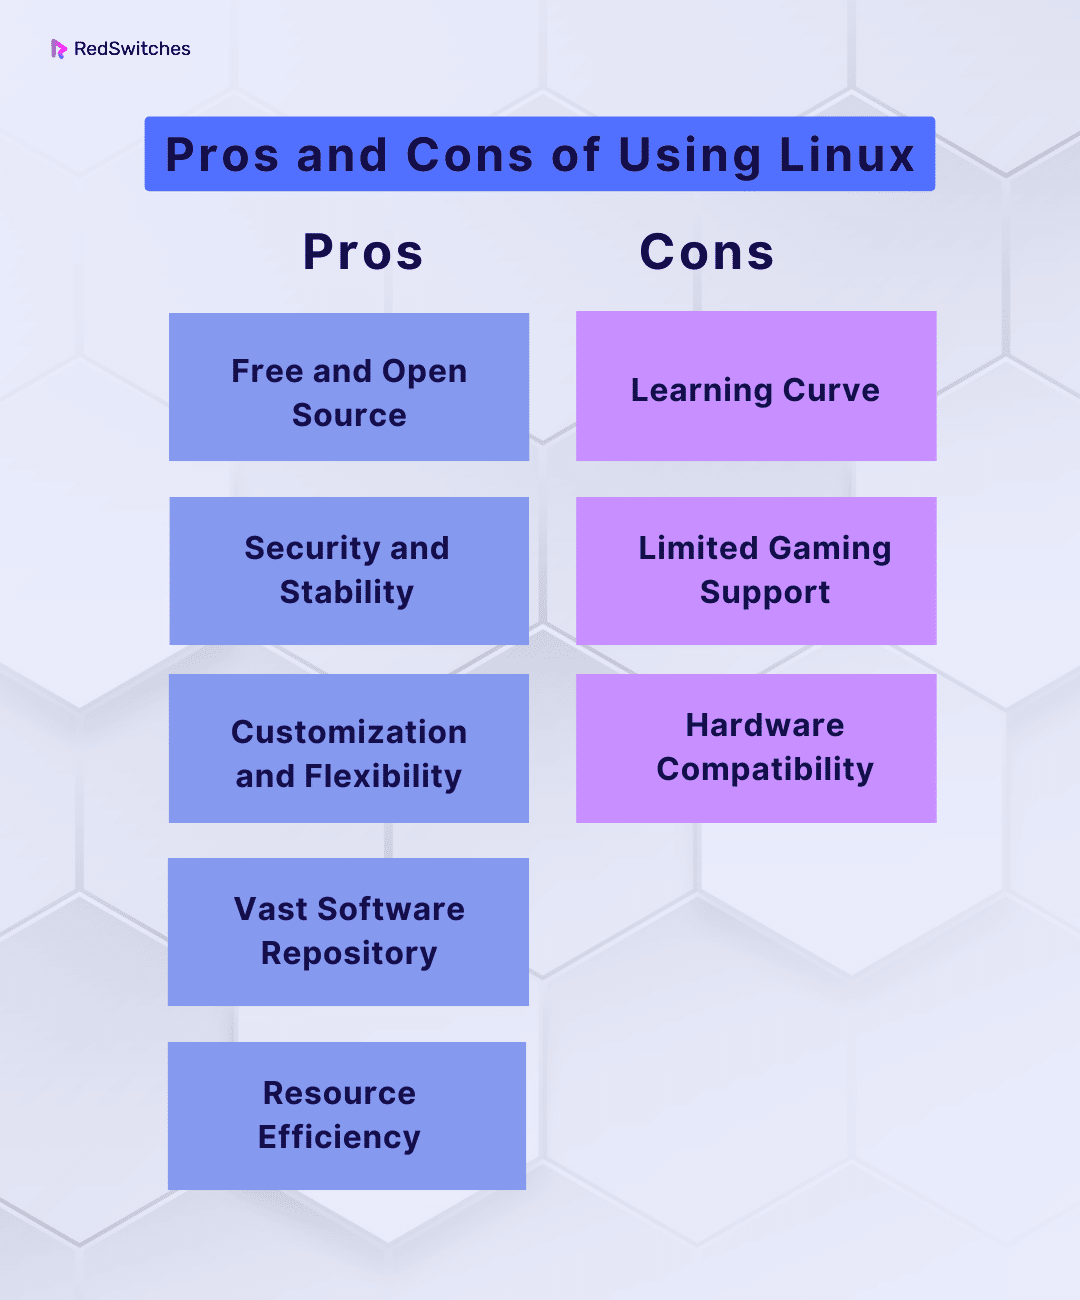 Pros and Cons of Using Linux